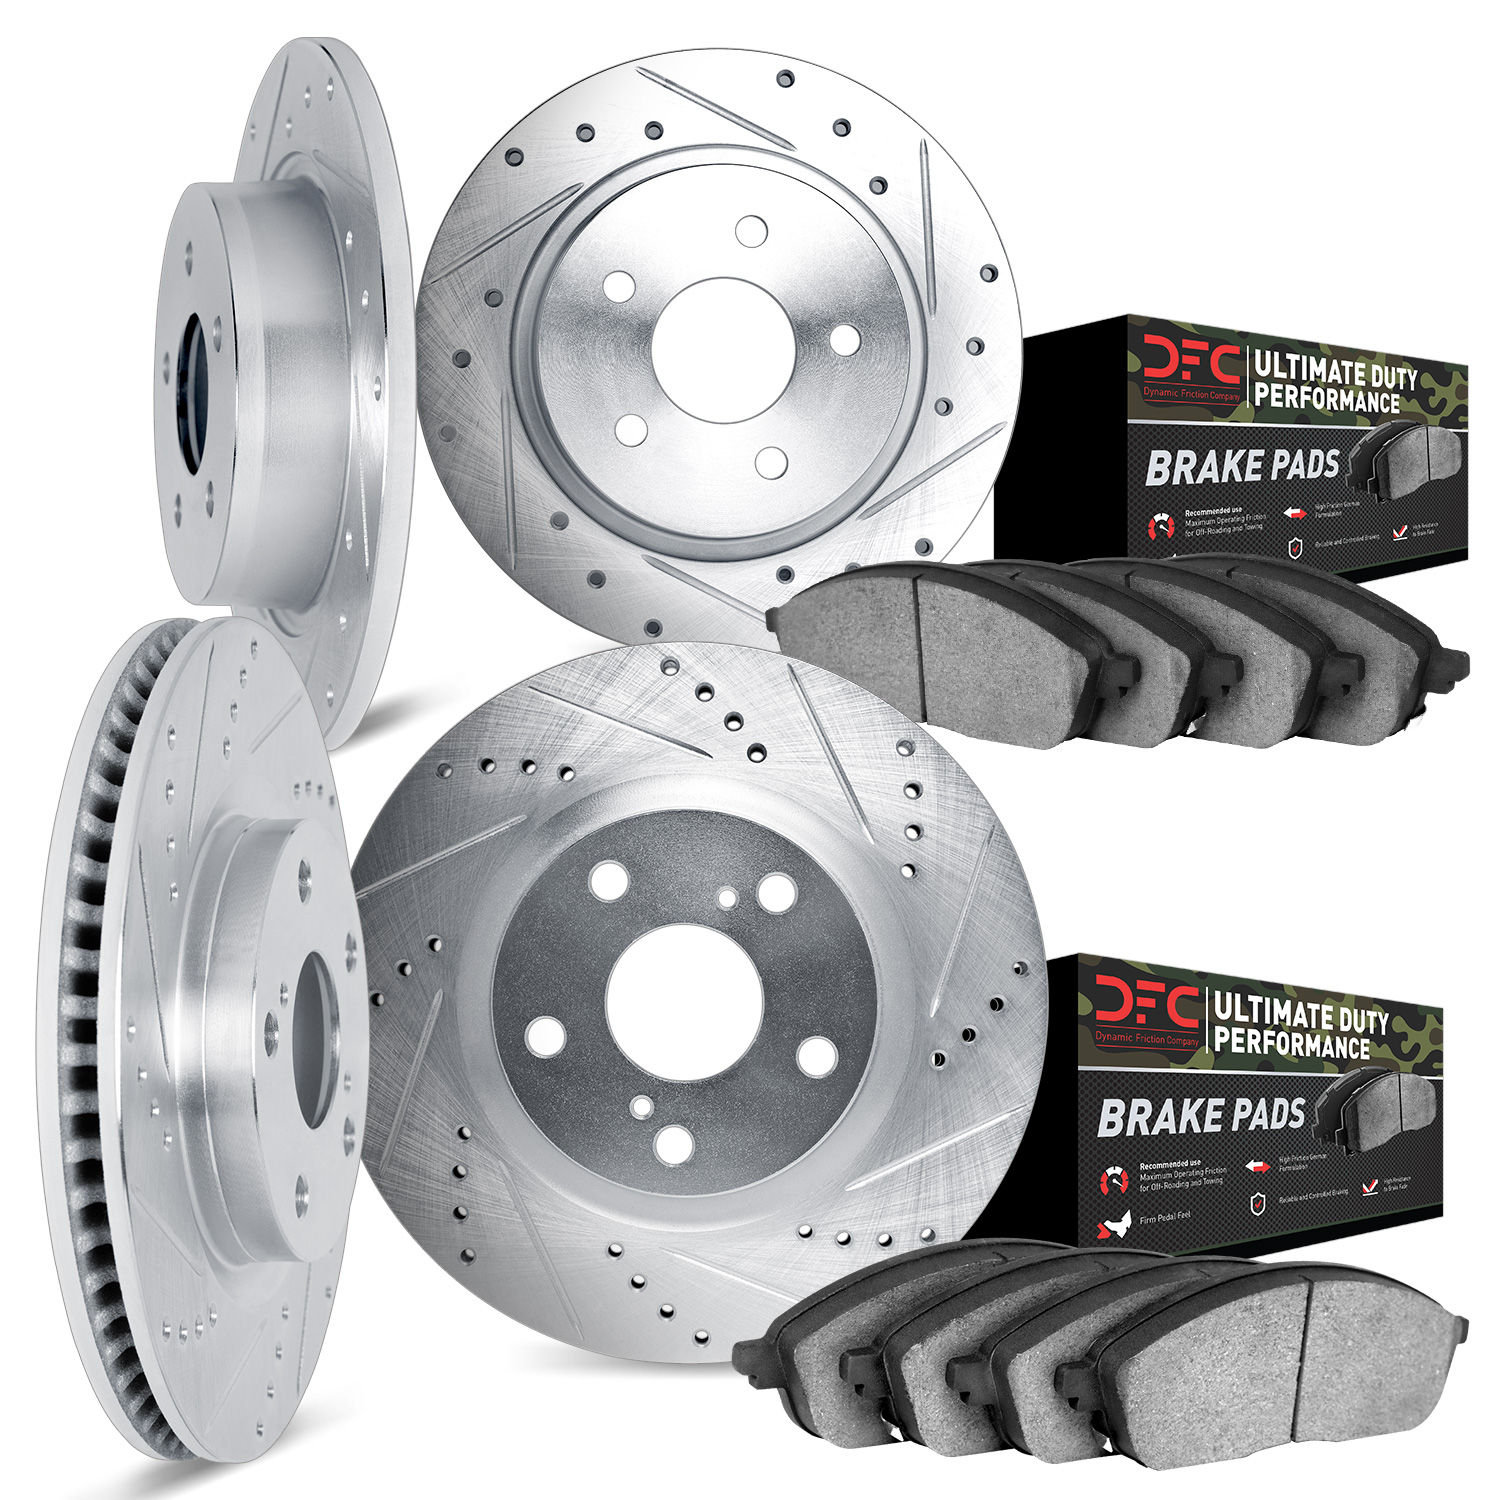 7404-42013 Drilled/Slotted Brake Rotors with Ultimate-Duty Brake Pads Kit [Silver], 1999-2002 Mopar, Position: Front and Rear